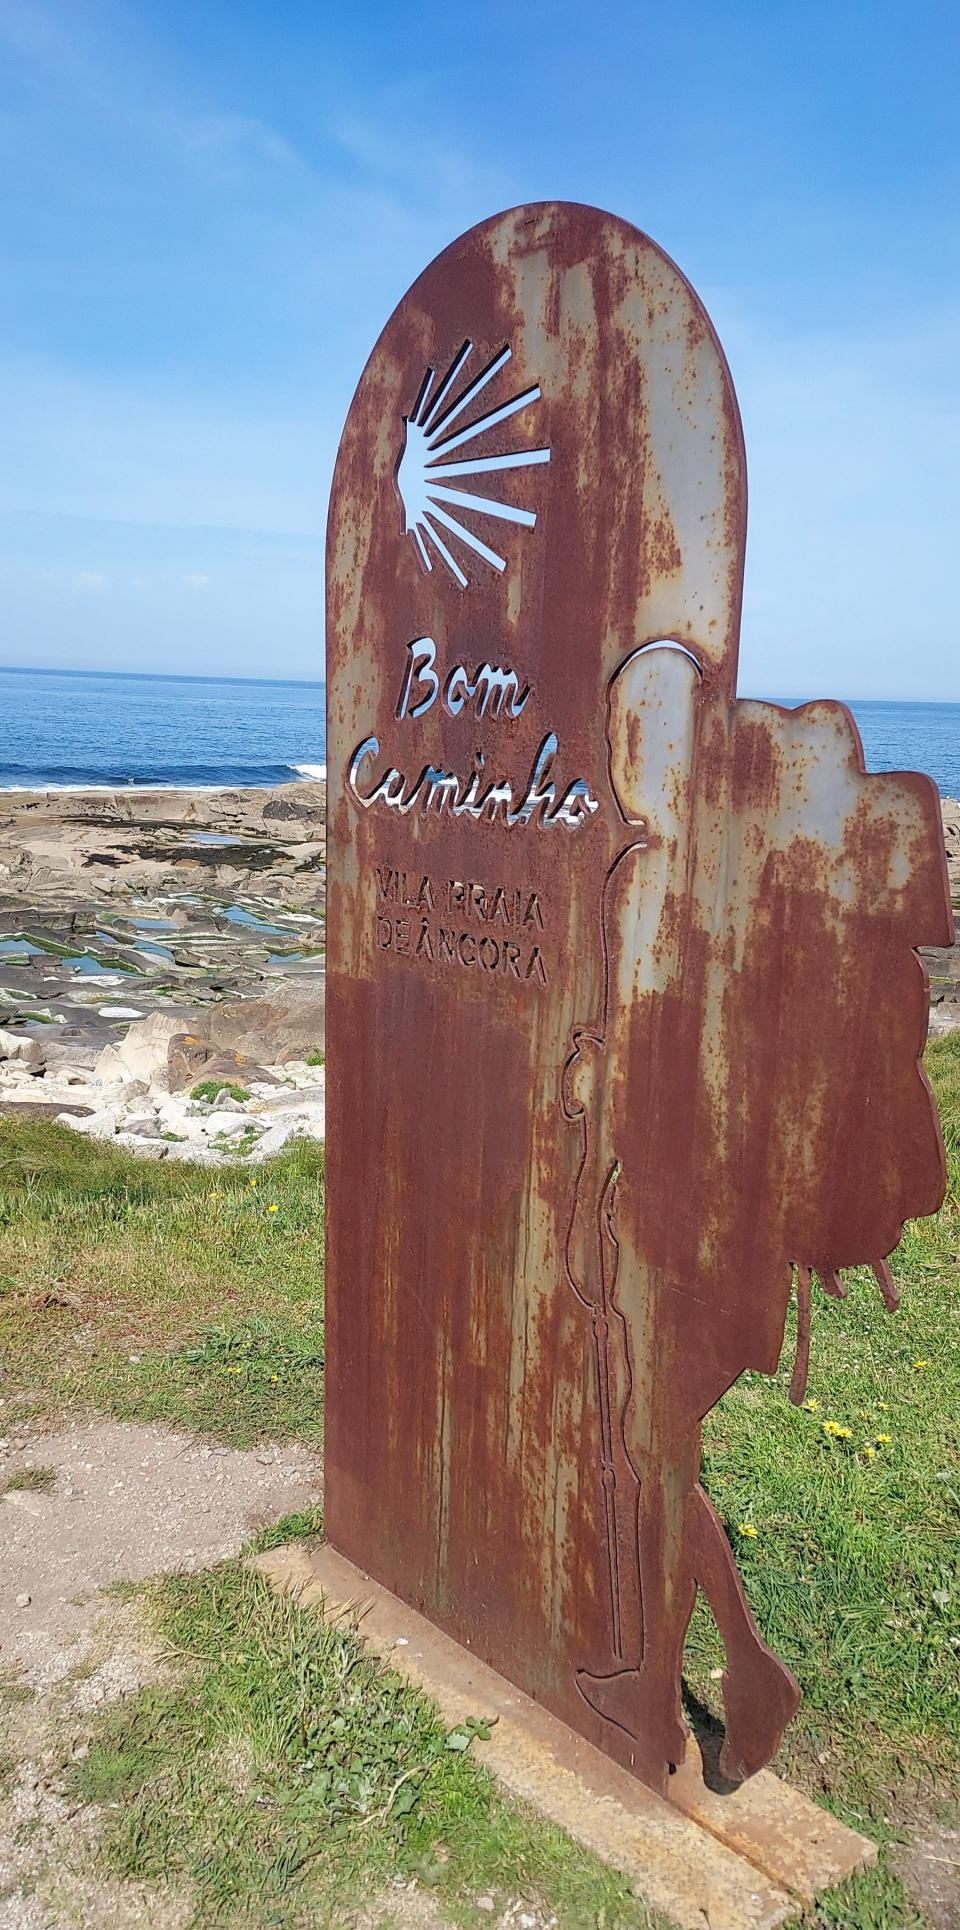 One is many of the signs that a pilgrim will find while walking the 160-mile Camino de Santiago.